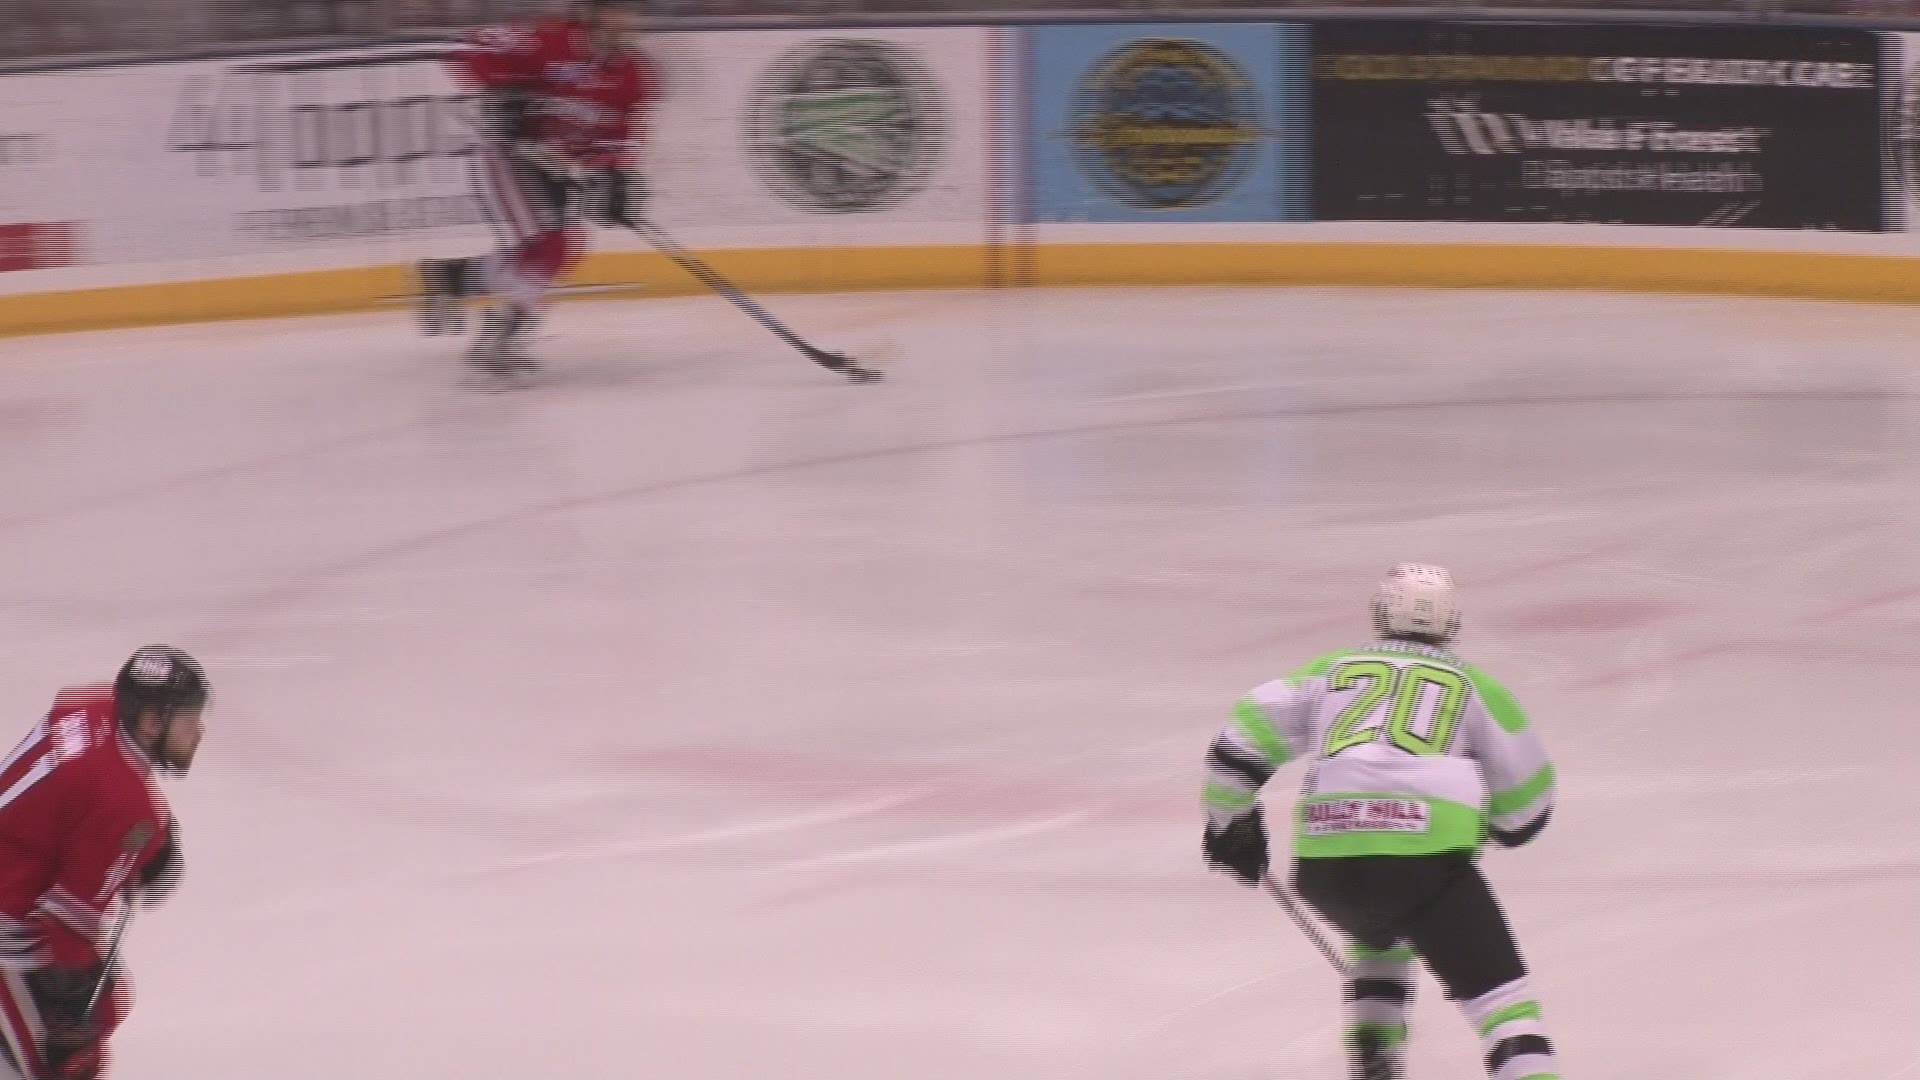 The Carolina Thunderbirds defeated the Elmira Enforcers 7-3 in game one of the 2019 FHL Commissioner's Cup final Friday in Winston-Salem.